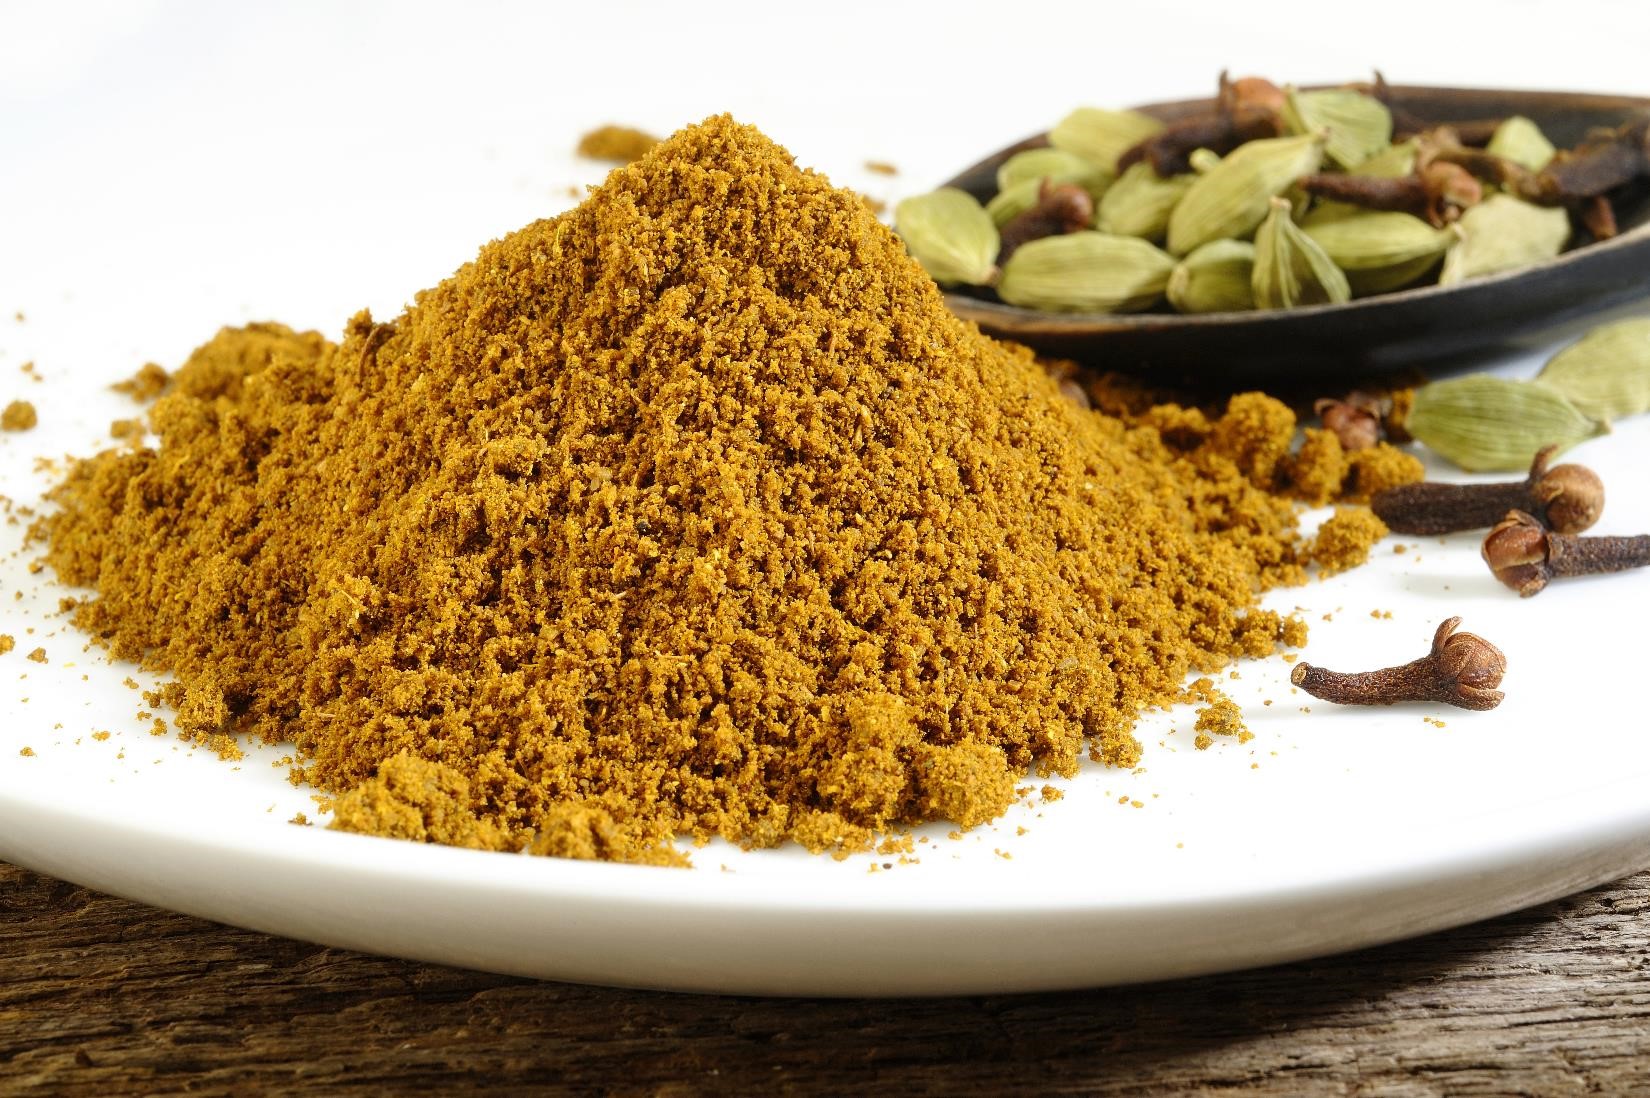 FIND OUT MORE ABOUT GARAM MASALA